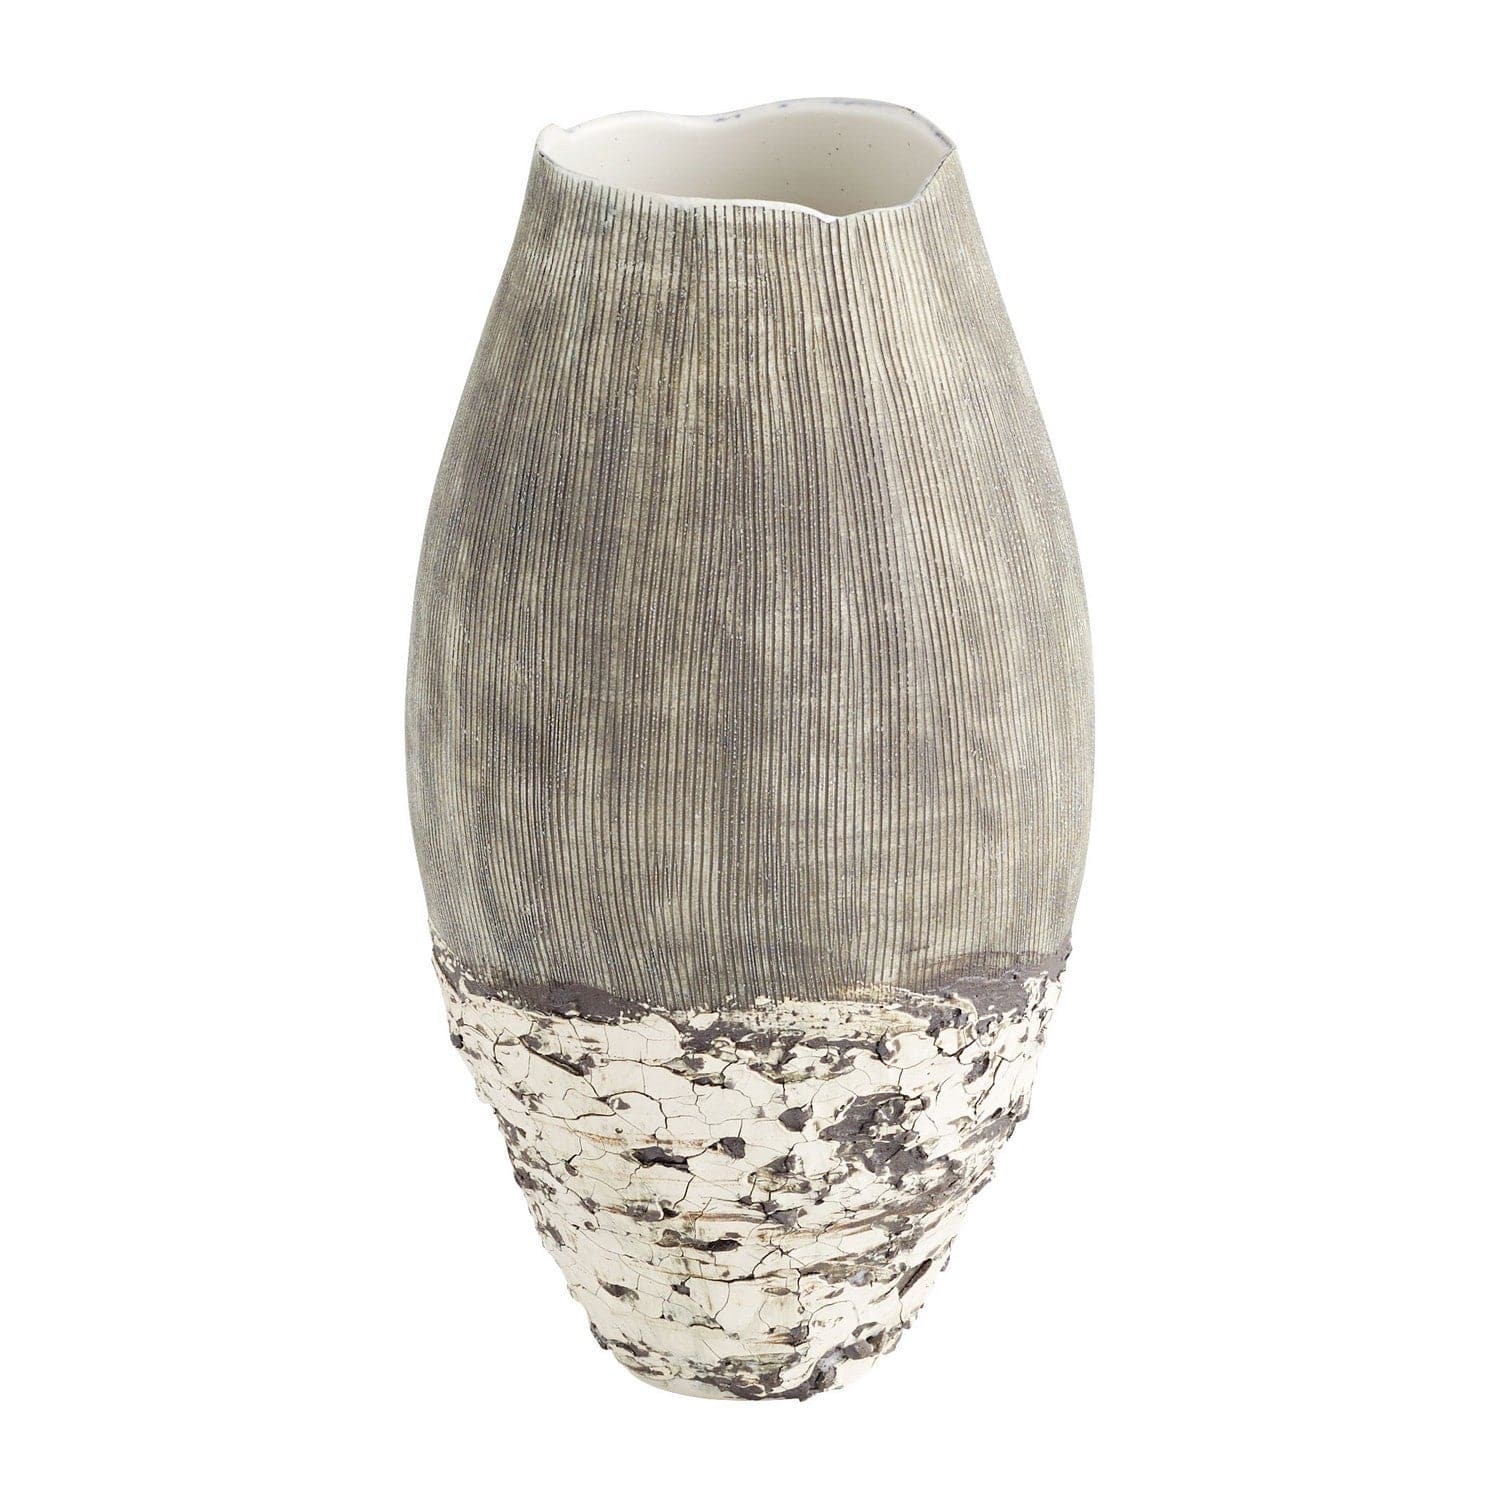 Cyan - 11412 - Vase - Calypso - Off White And Brown